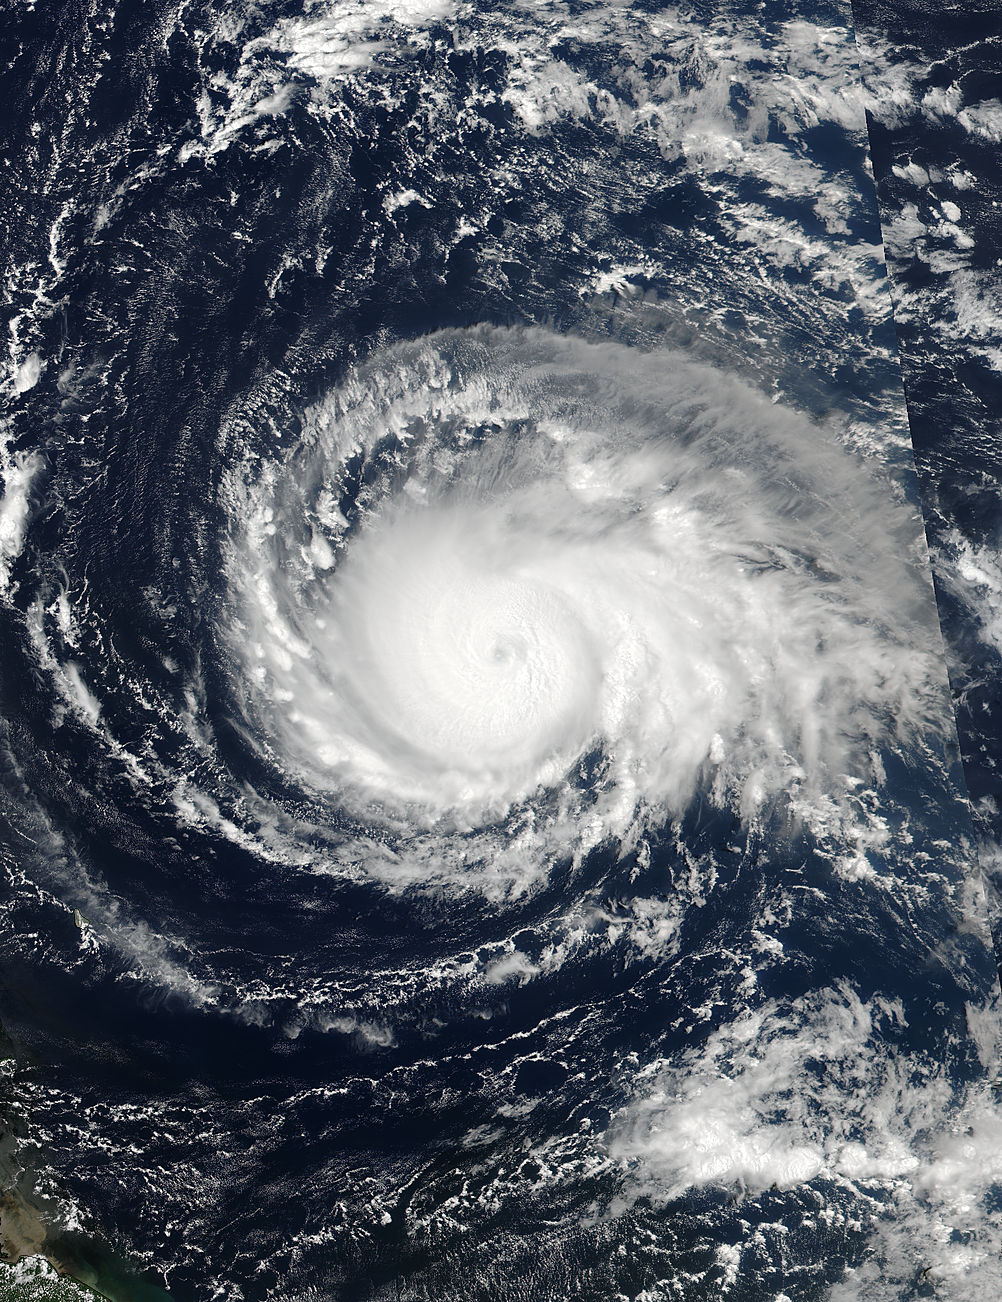 Satellite image of Irma, with a swirling cloud mass over the ocean.